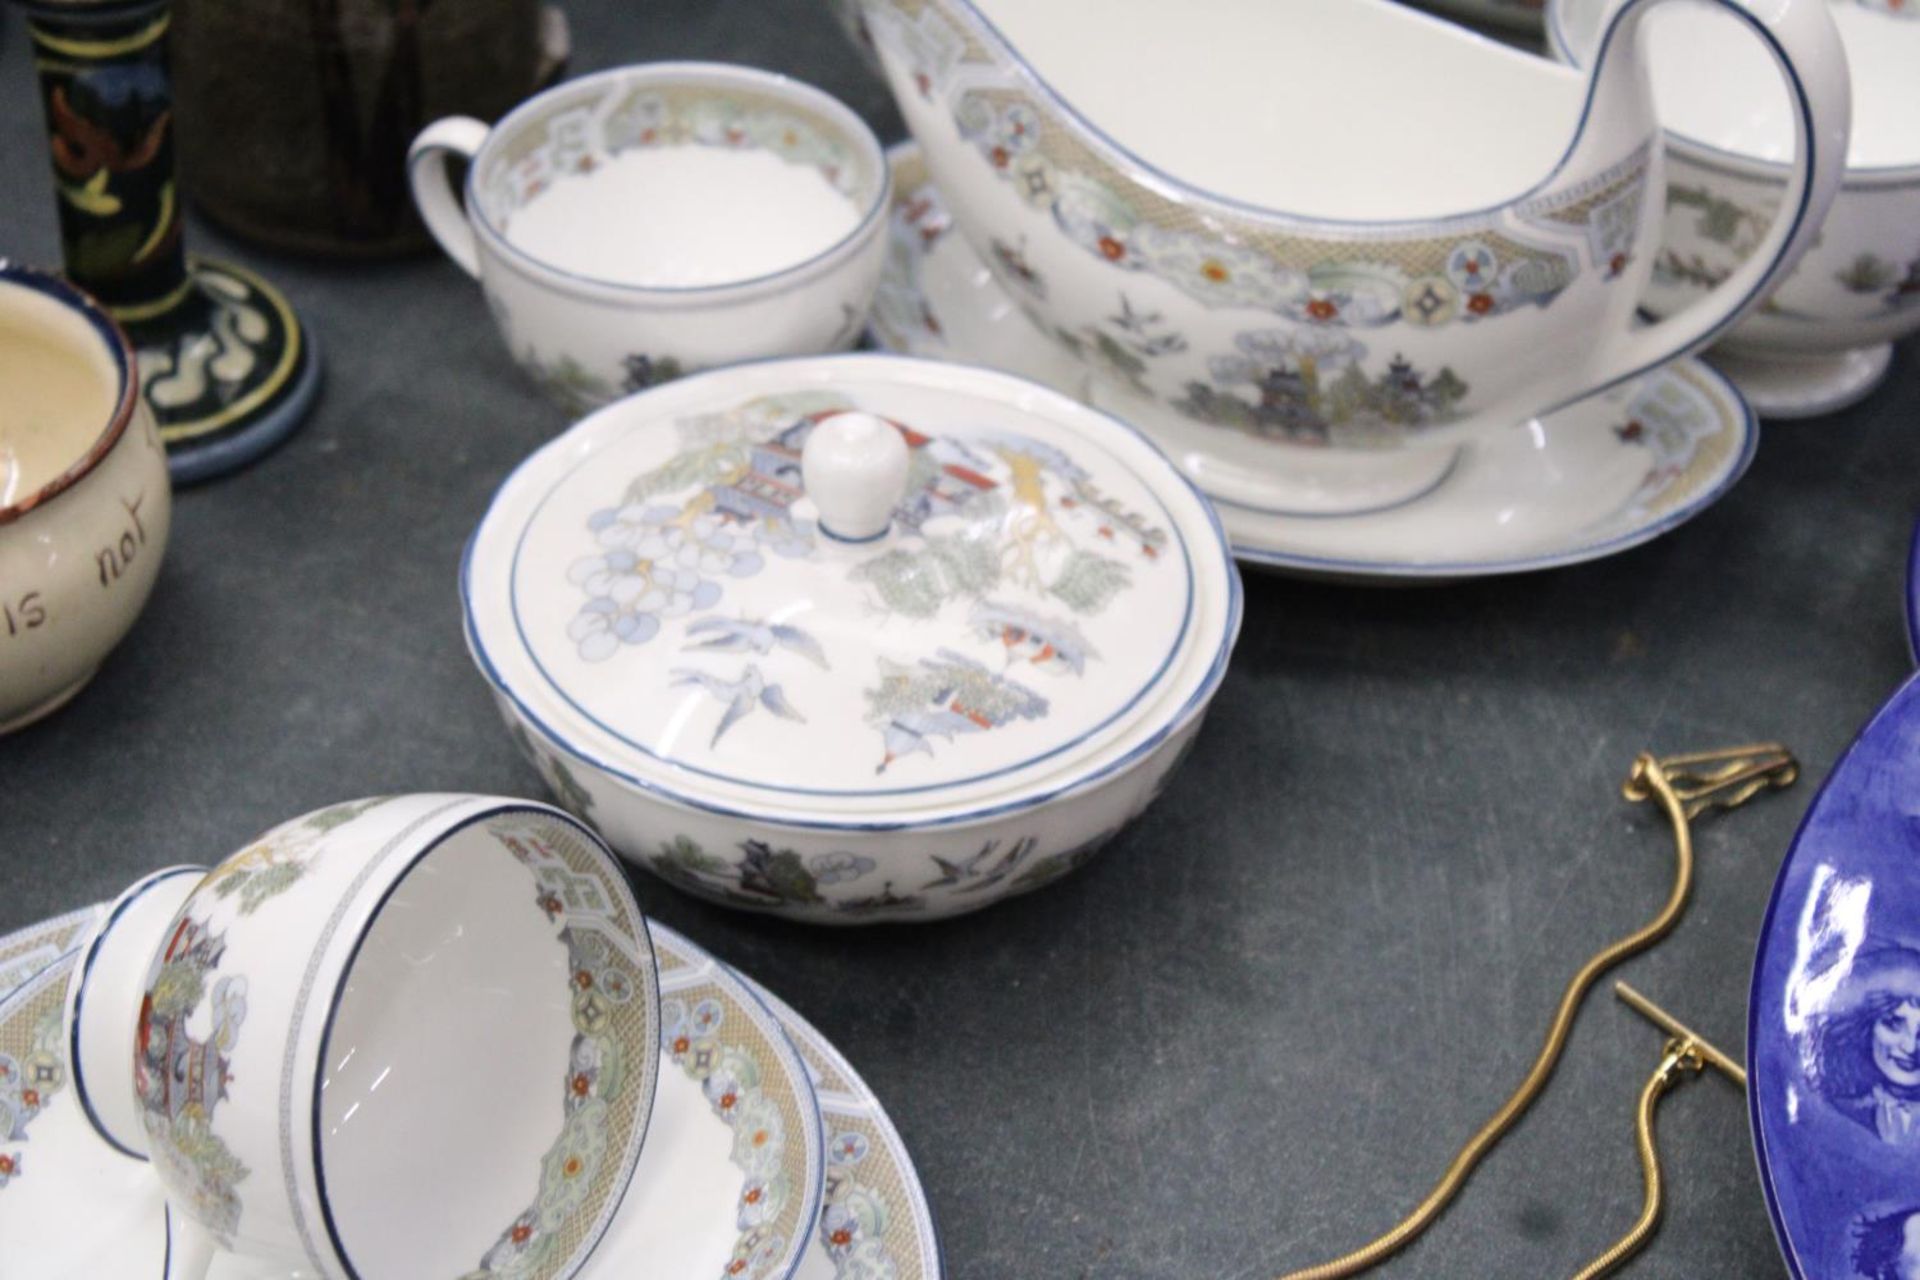 A PART ORIENTAL STYLE WEDGWOOD DINNER SERVICE TO INCLUDE A GRAVY JUG, CUP, PLATES ETC - Image 5 of 6